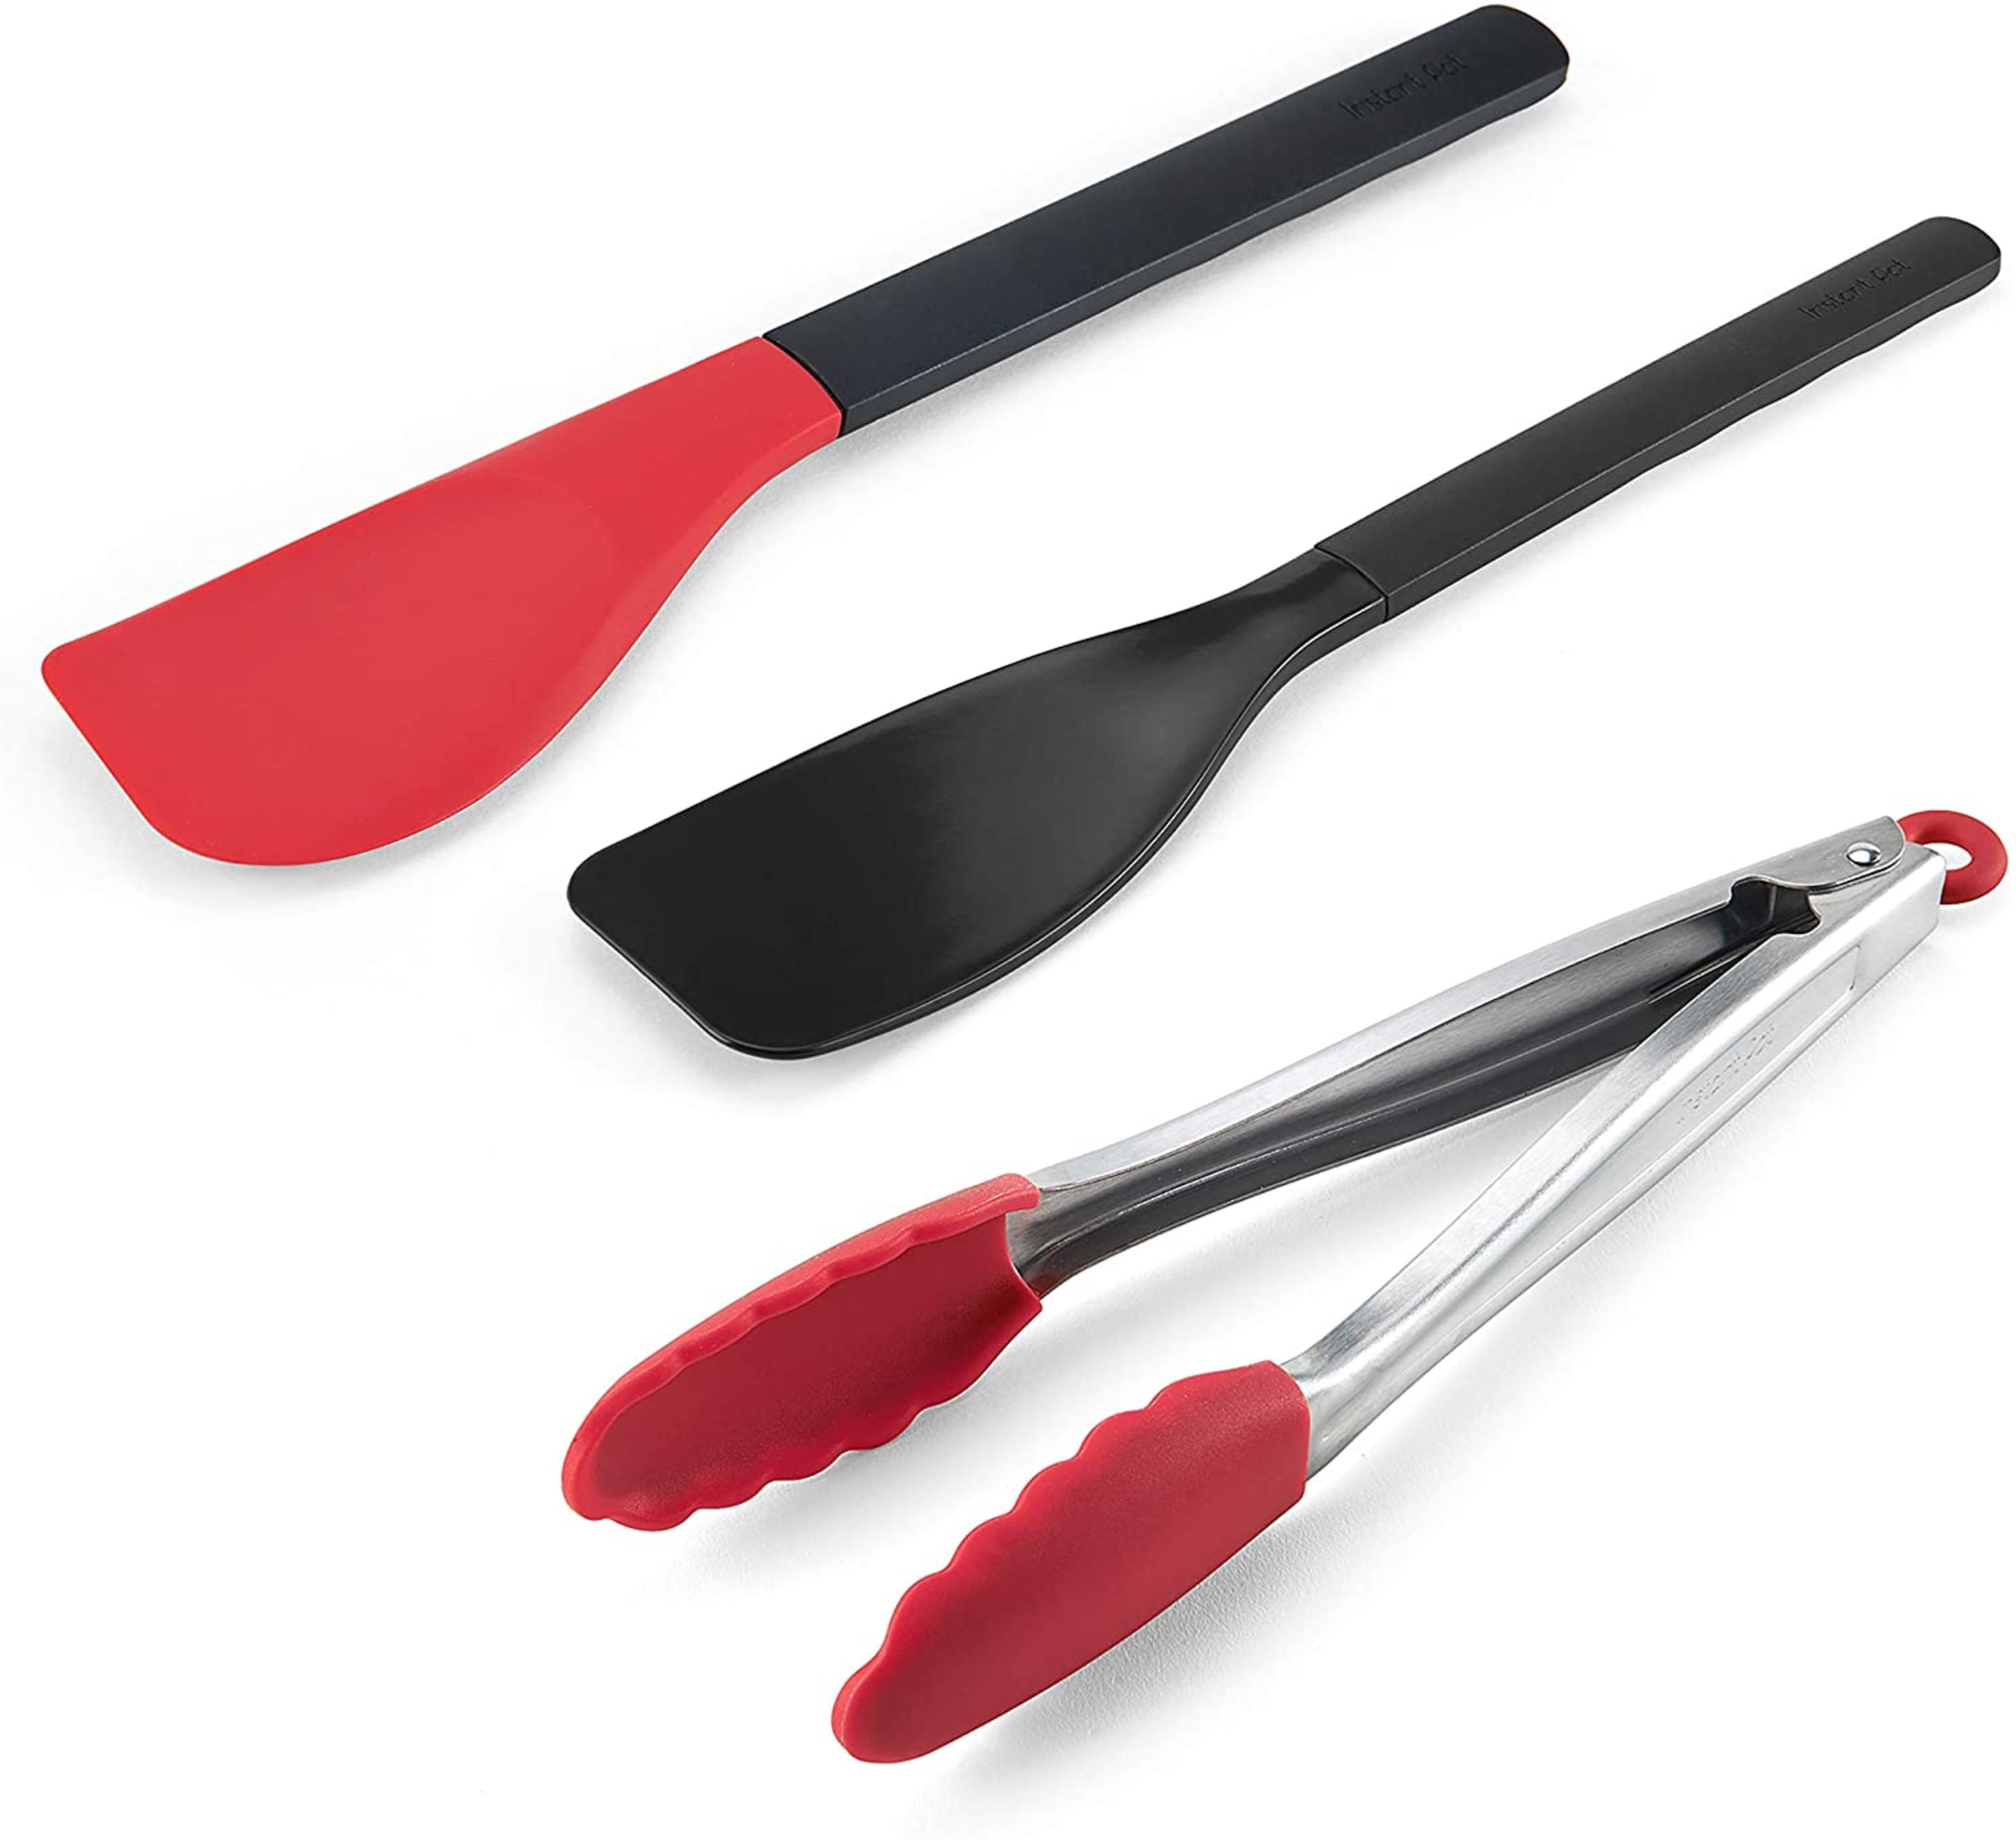 3 Silicone Utensils Ladle, Stir/ Serving Spoon, Pincher Tong & 1 Plastic  Spoon